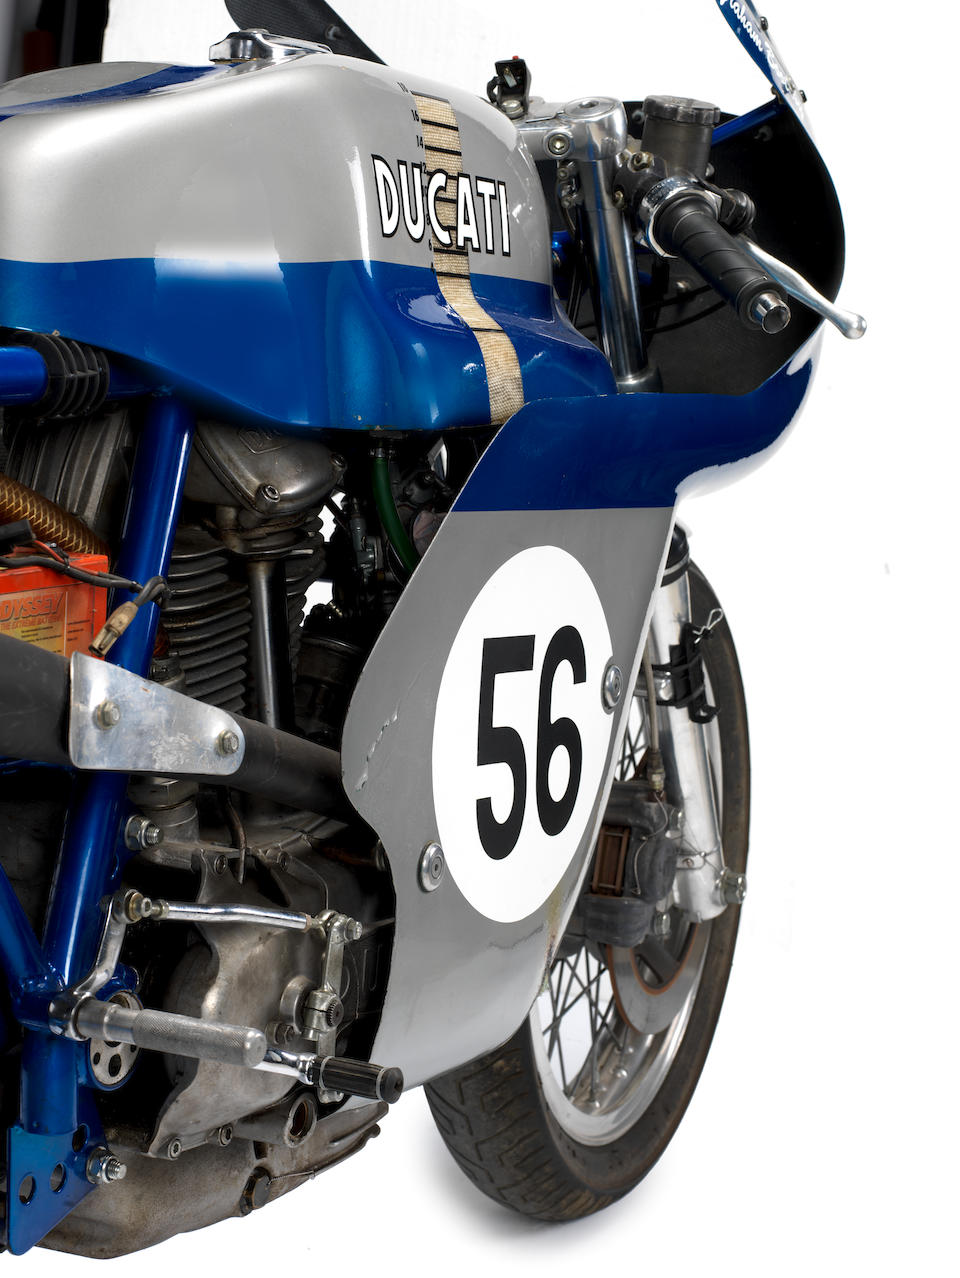 The Ducati Corse factory race department-built, spare bike for the factory race team at the 1973 Bol d'Or 24-Hours, ex-Doug Lunn, Percy Tait, Steve Cull, Graham Boothby, Isle of Man TT, Irish Road Racing Championship, North West 200, ,1973  Ducati  750cc Works Endurance Racing Motorcycle Frame no. 3 (see text) Engine no. 752389 DM750